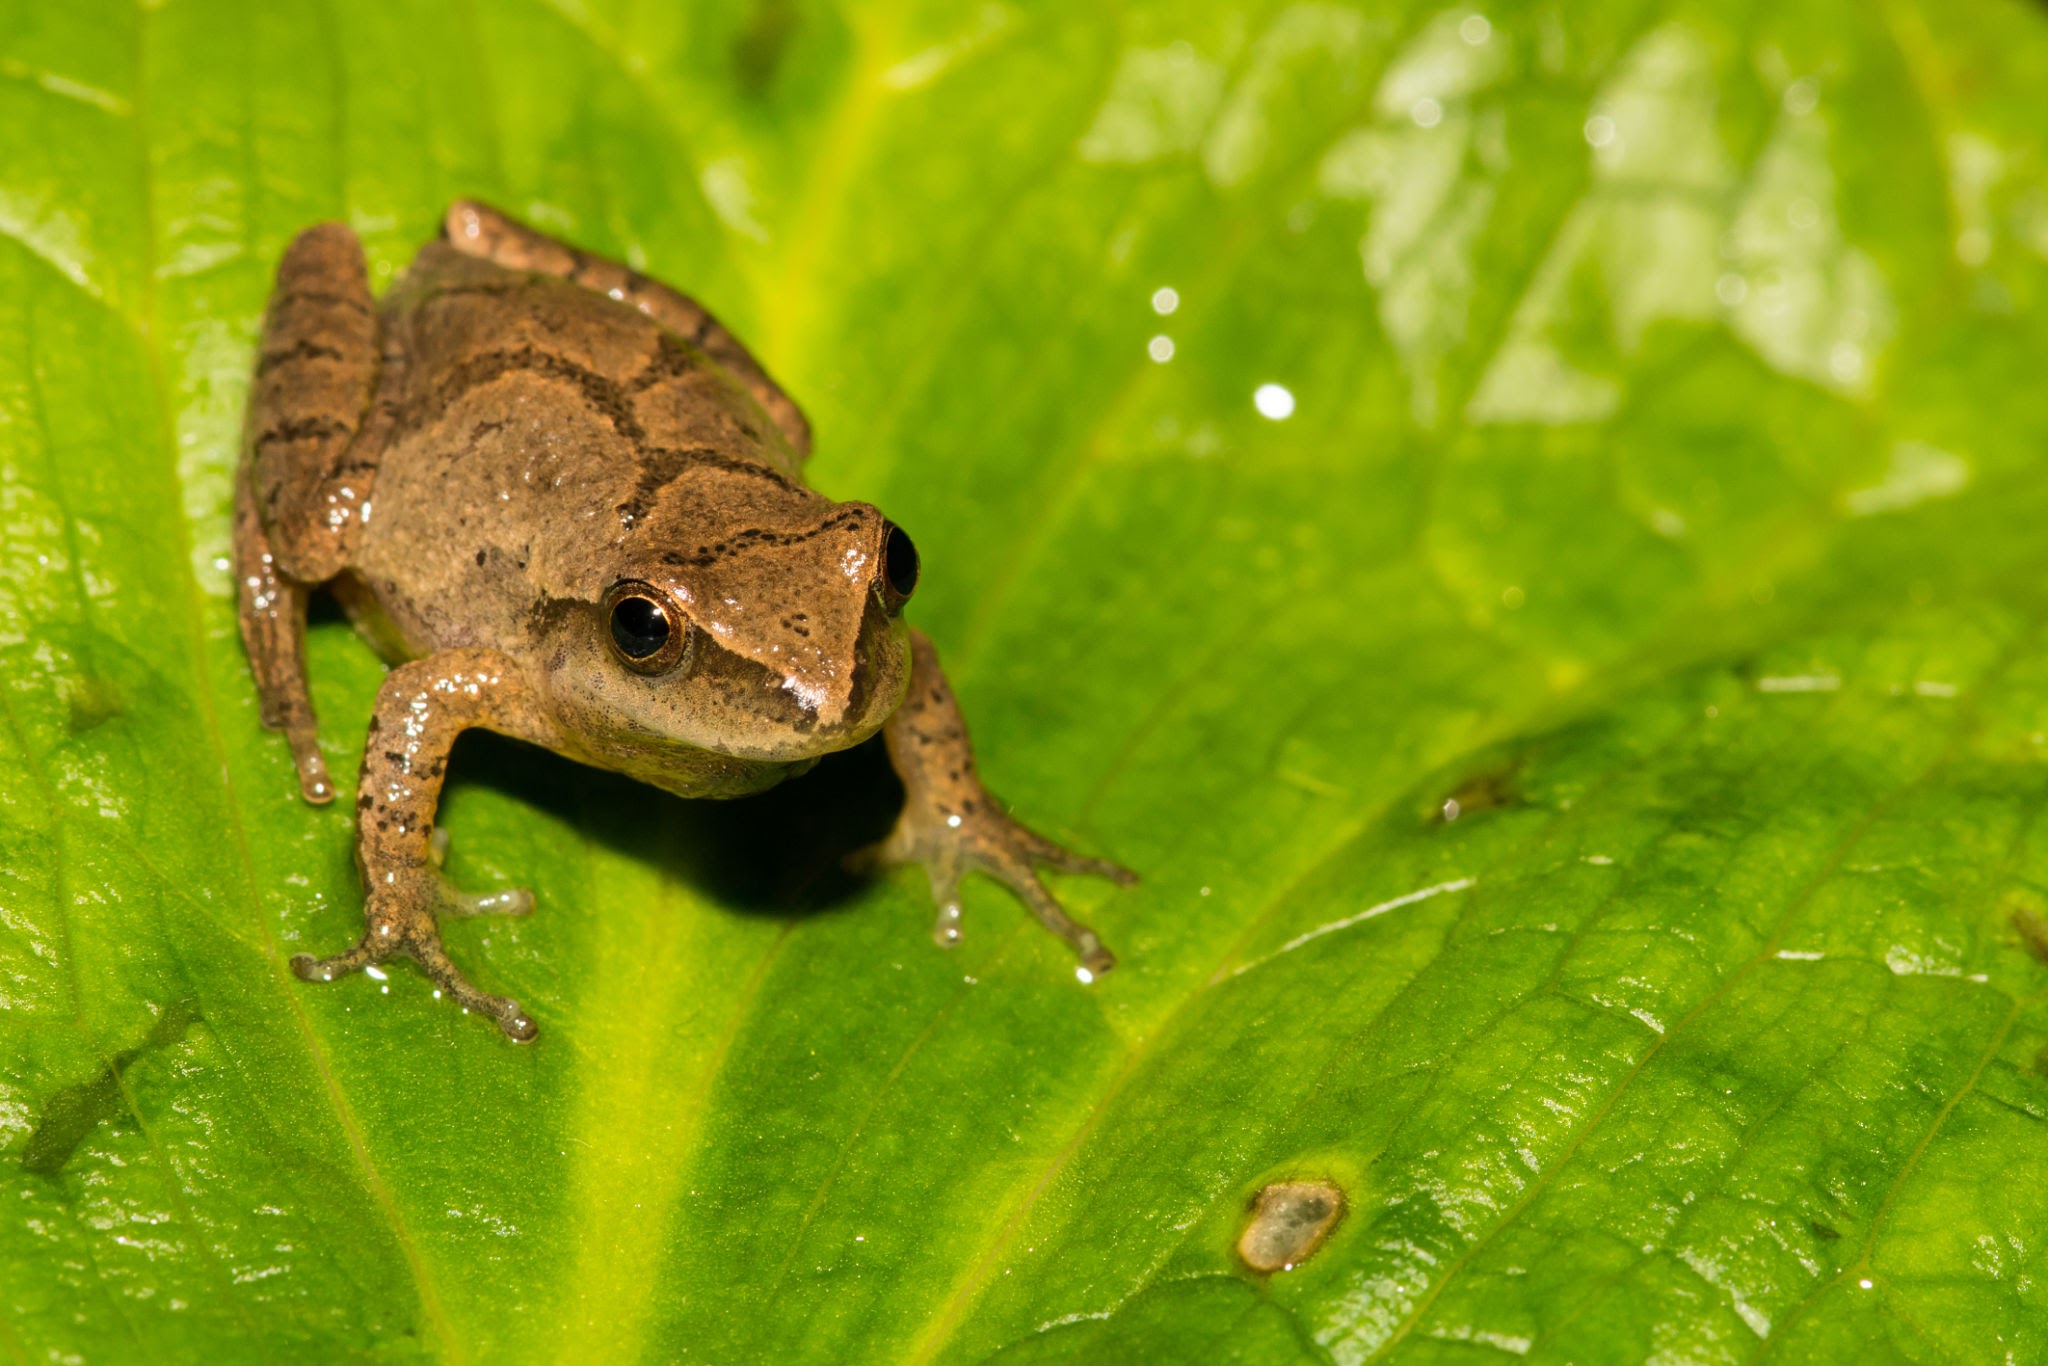 A Northern Spring Peeper crawling on a skunk cabbage leaf.